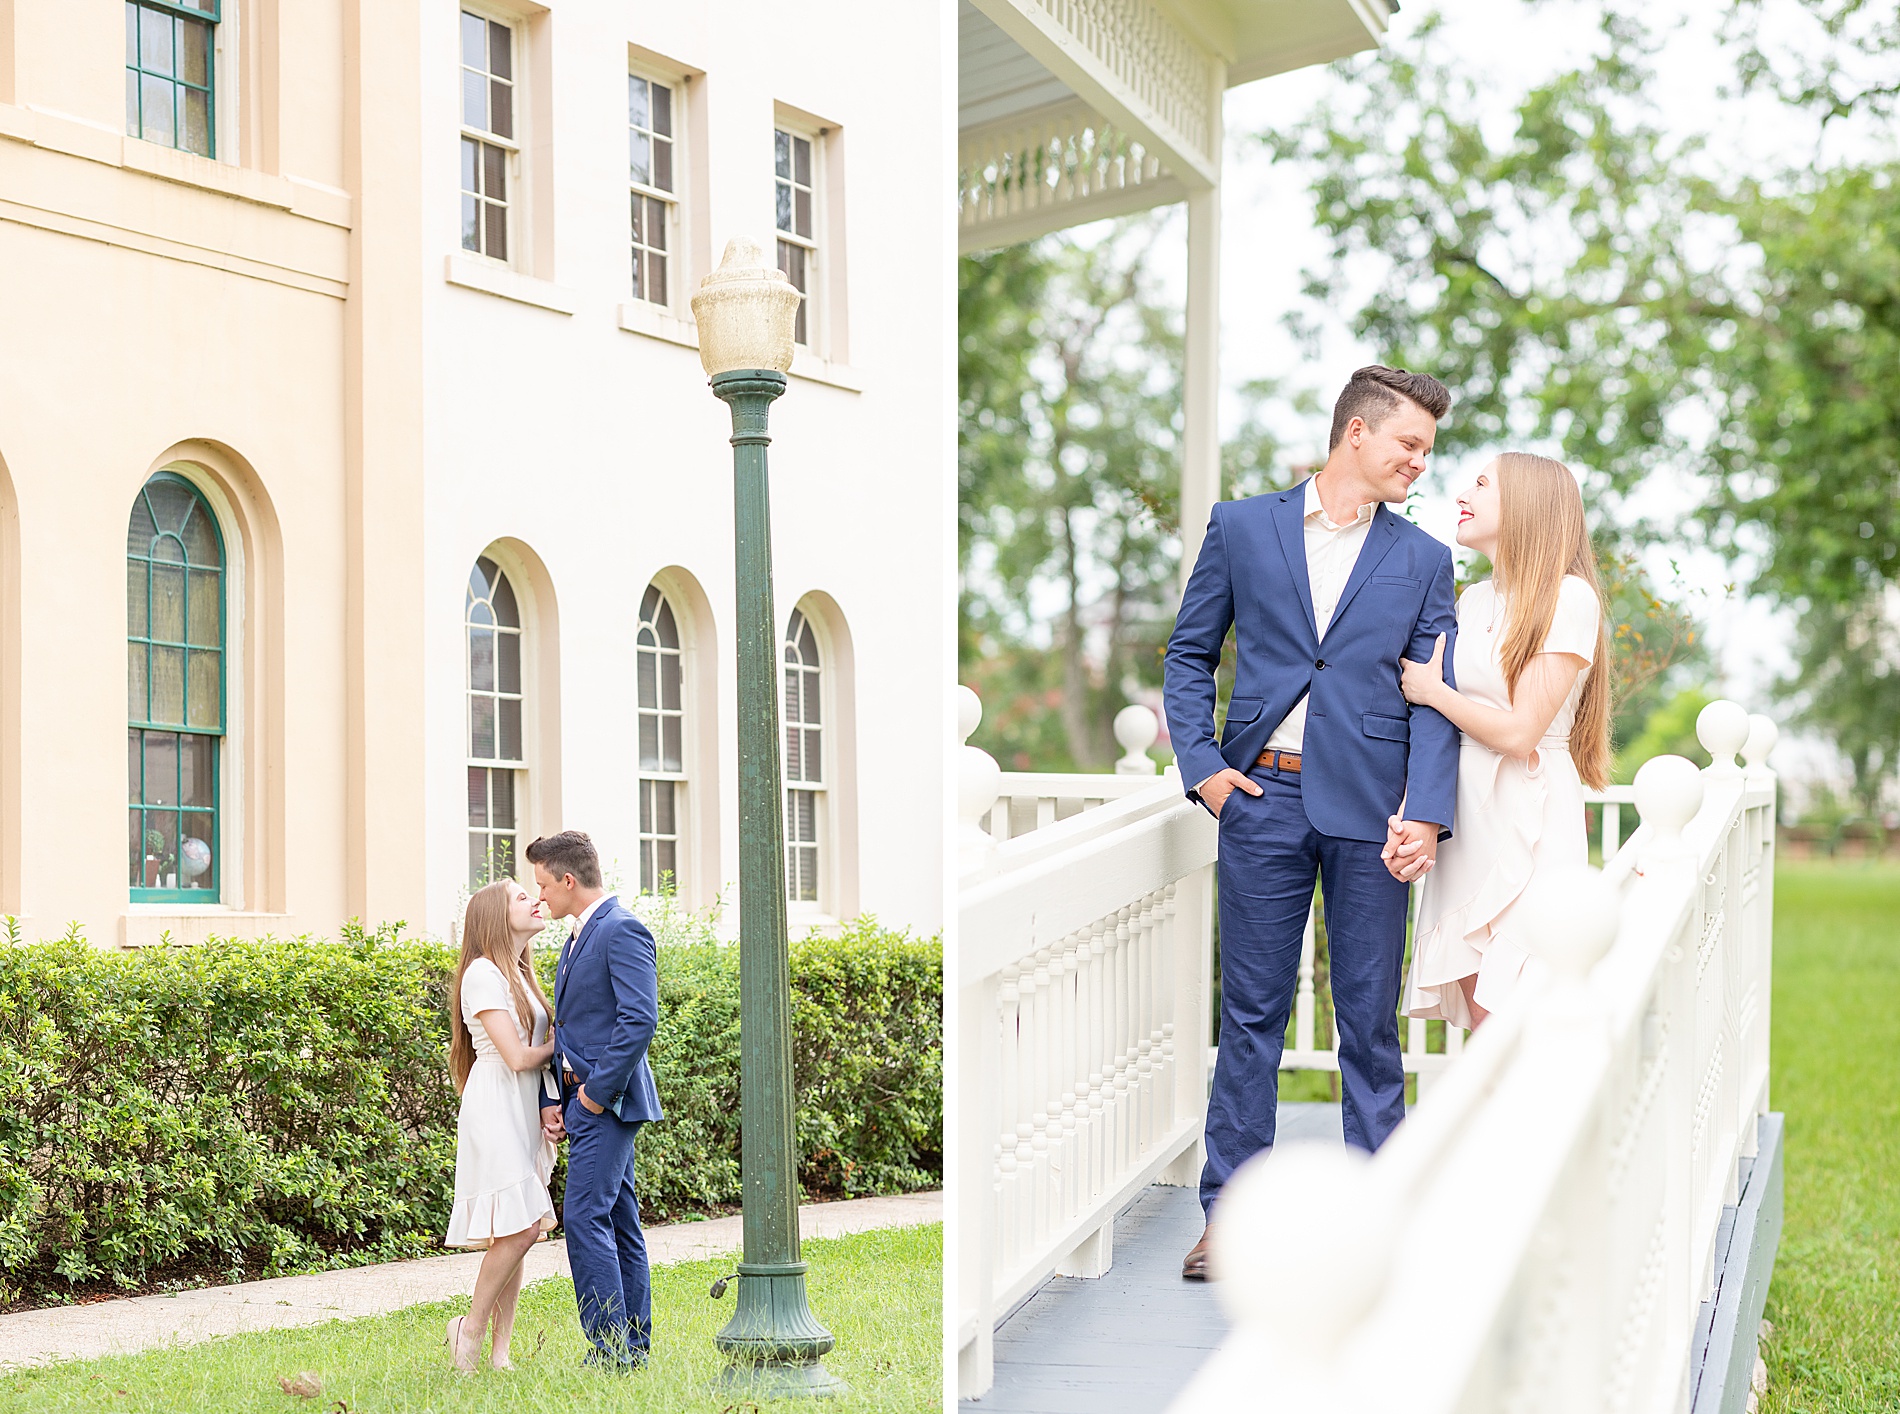 Engagement session from luxury wedding photographer experience